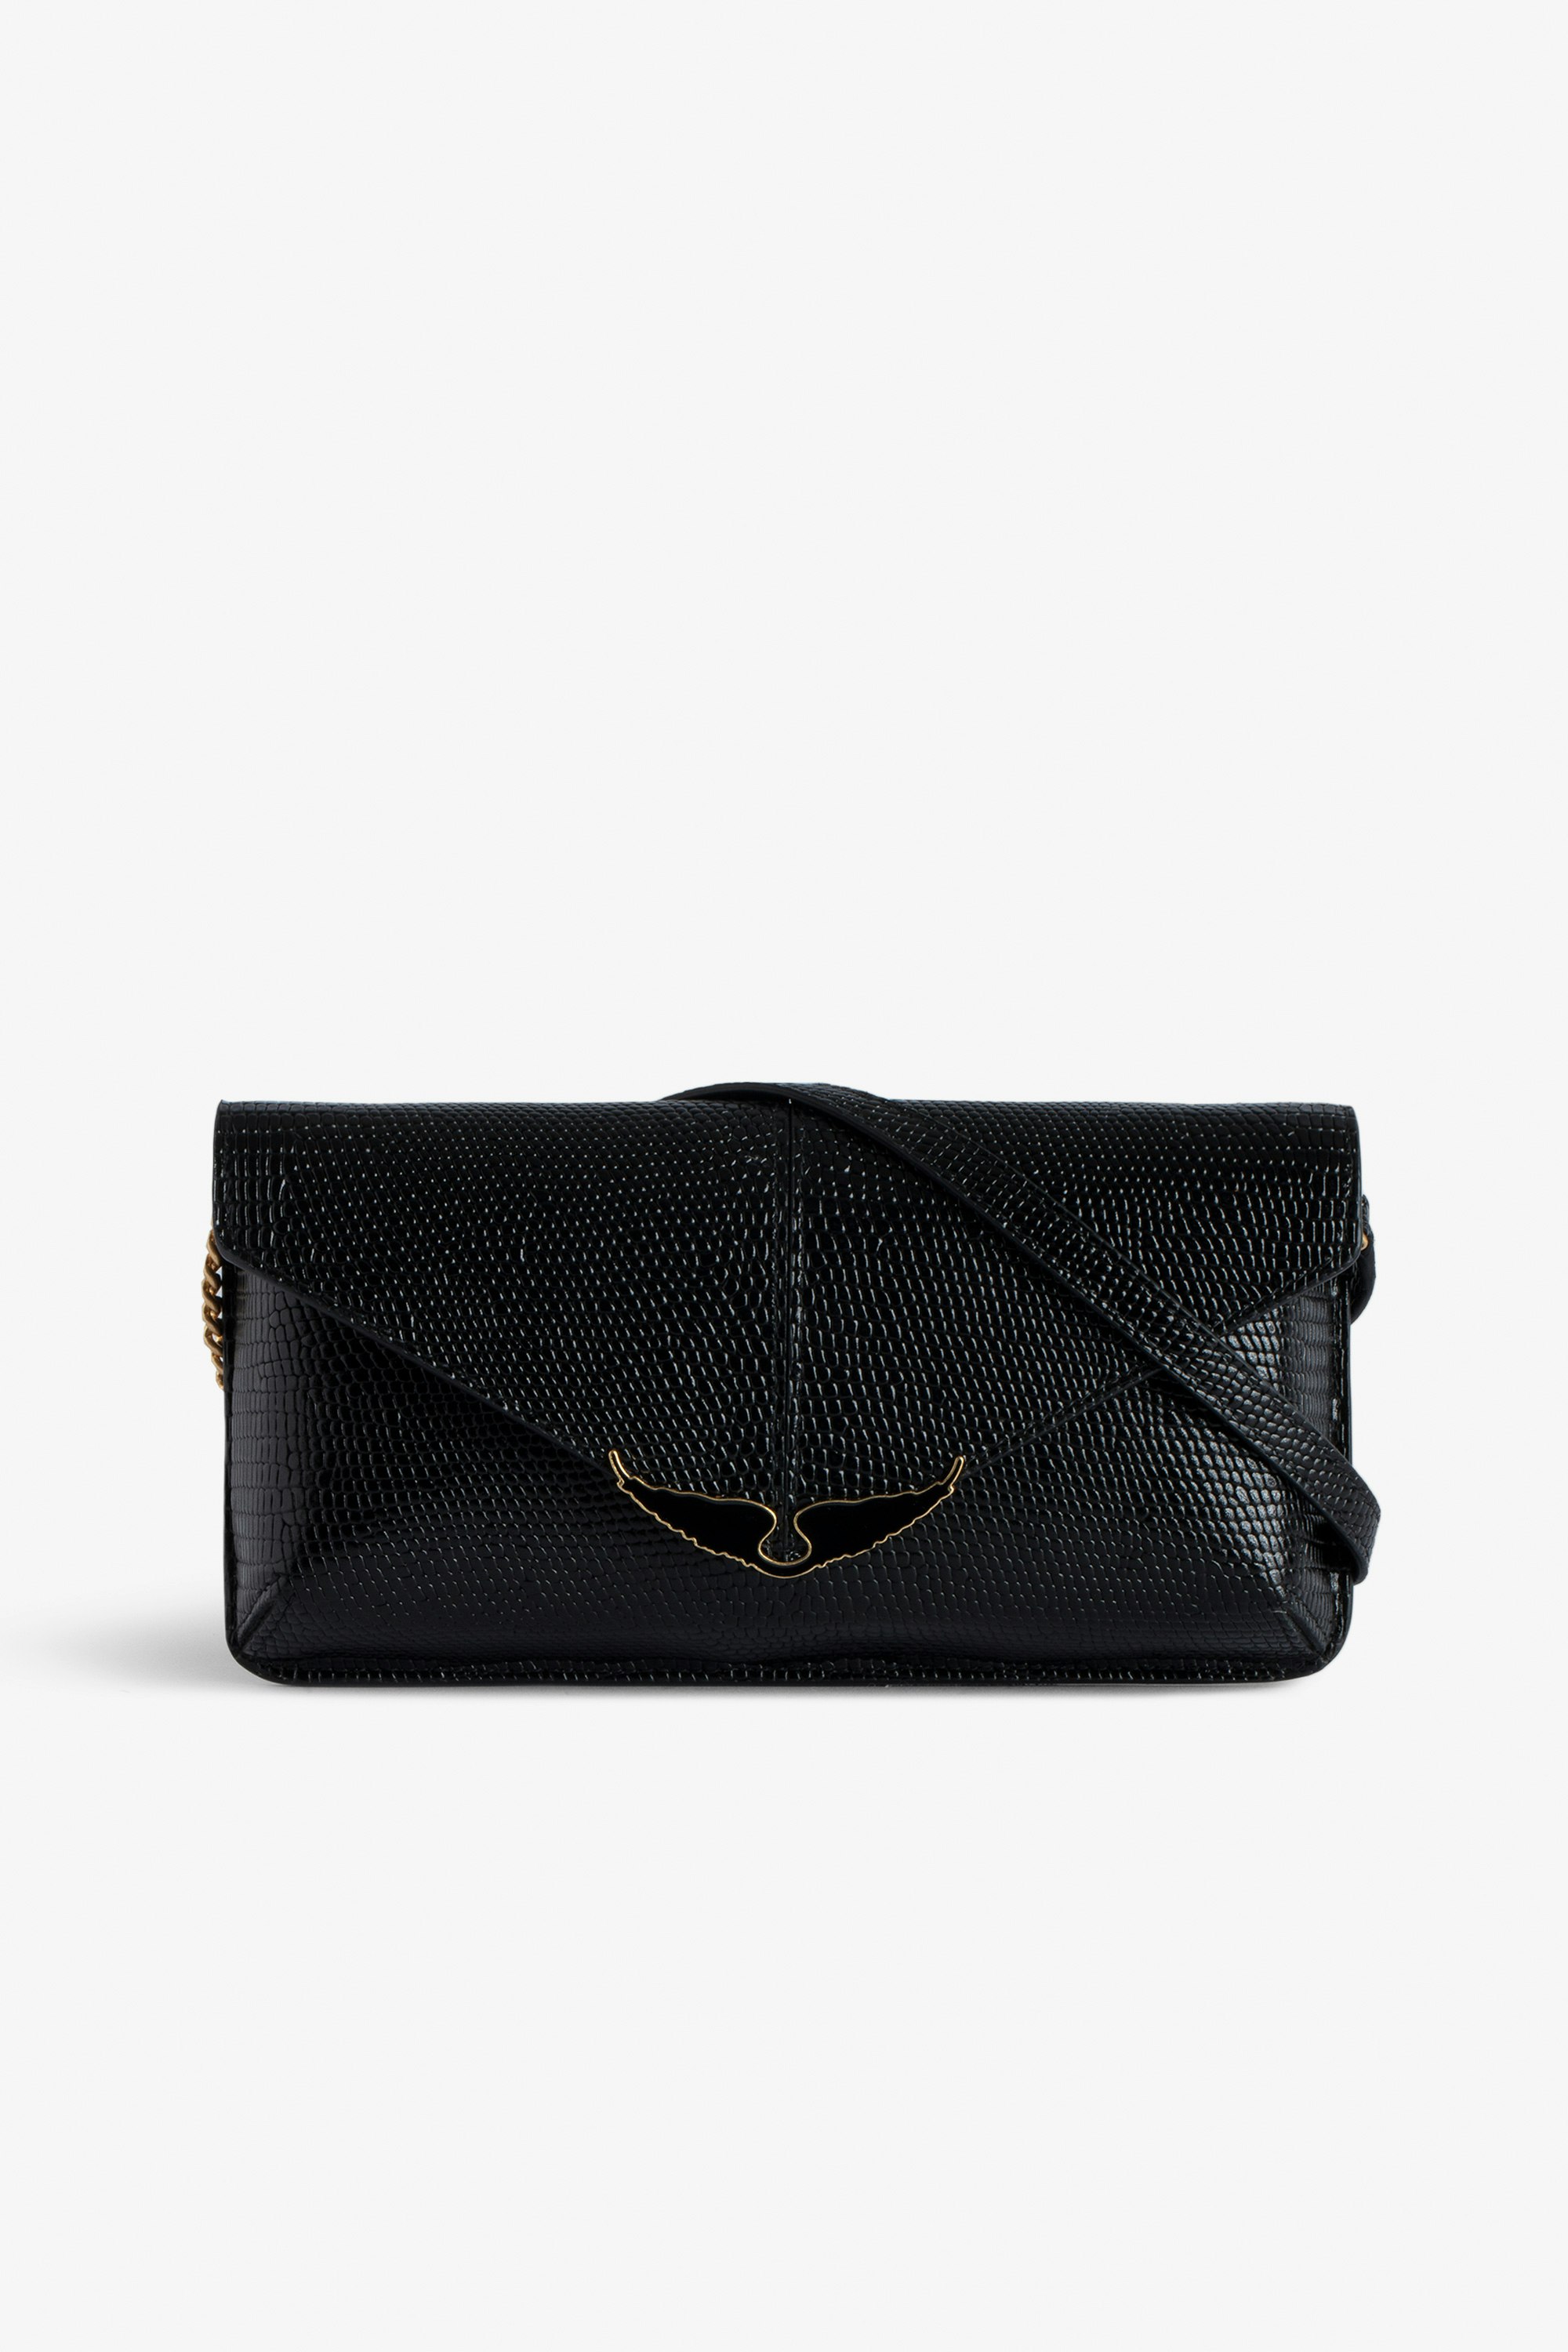 Borderline Embossed Clutch Women’s black iguana-embossed leather clutch with shoulder strap with wings charm.